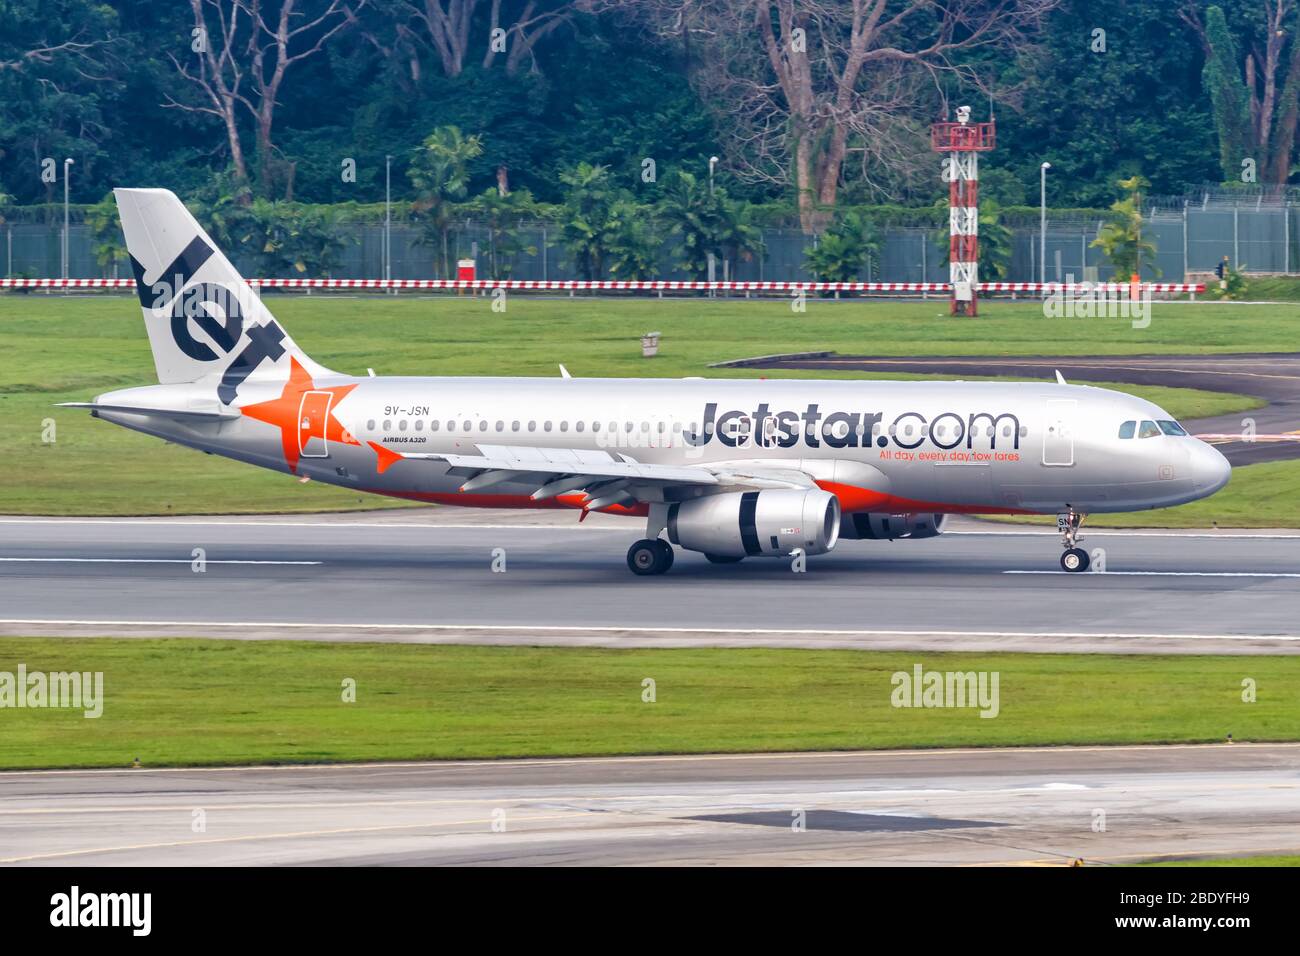 Changi, Singapore – January 29, 2018: Jetstar Asia Airways Airbus A320 airplane at Changi airport (SIN) in Singapore. Airbus is a European aircraft ma Stock Photo